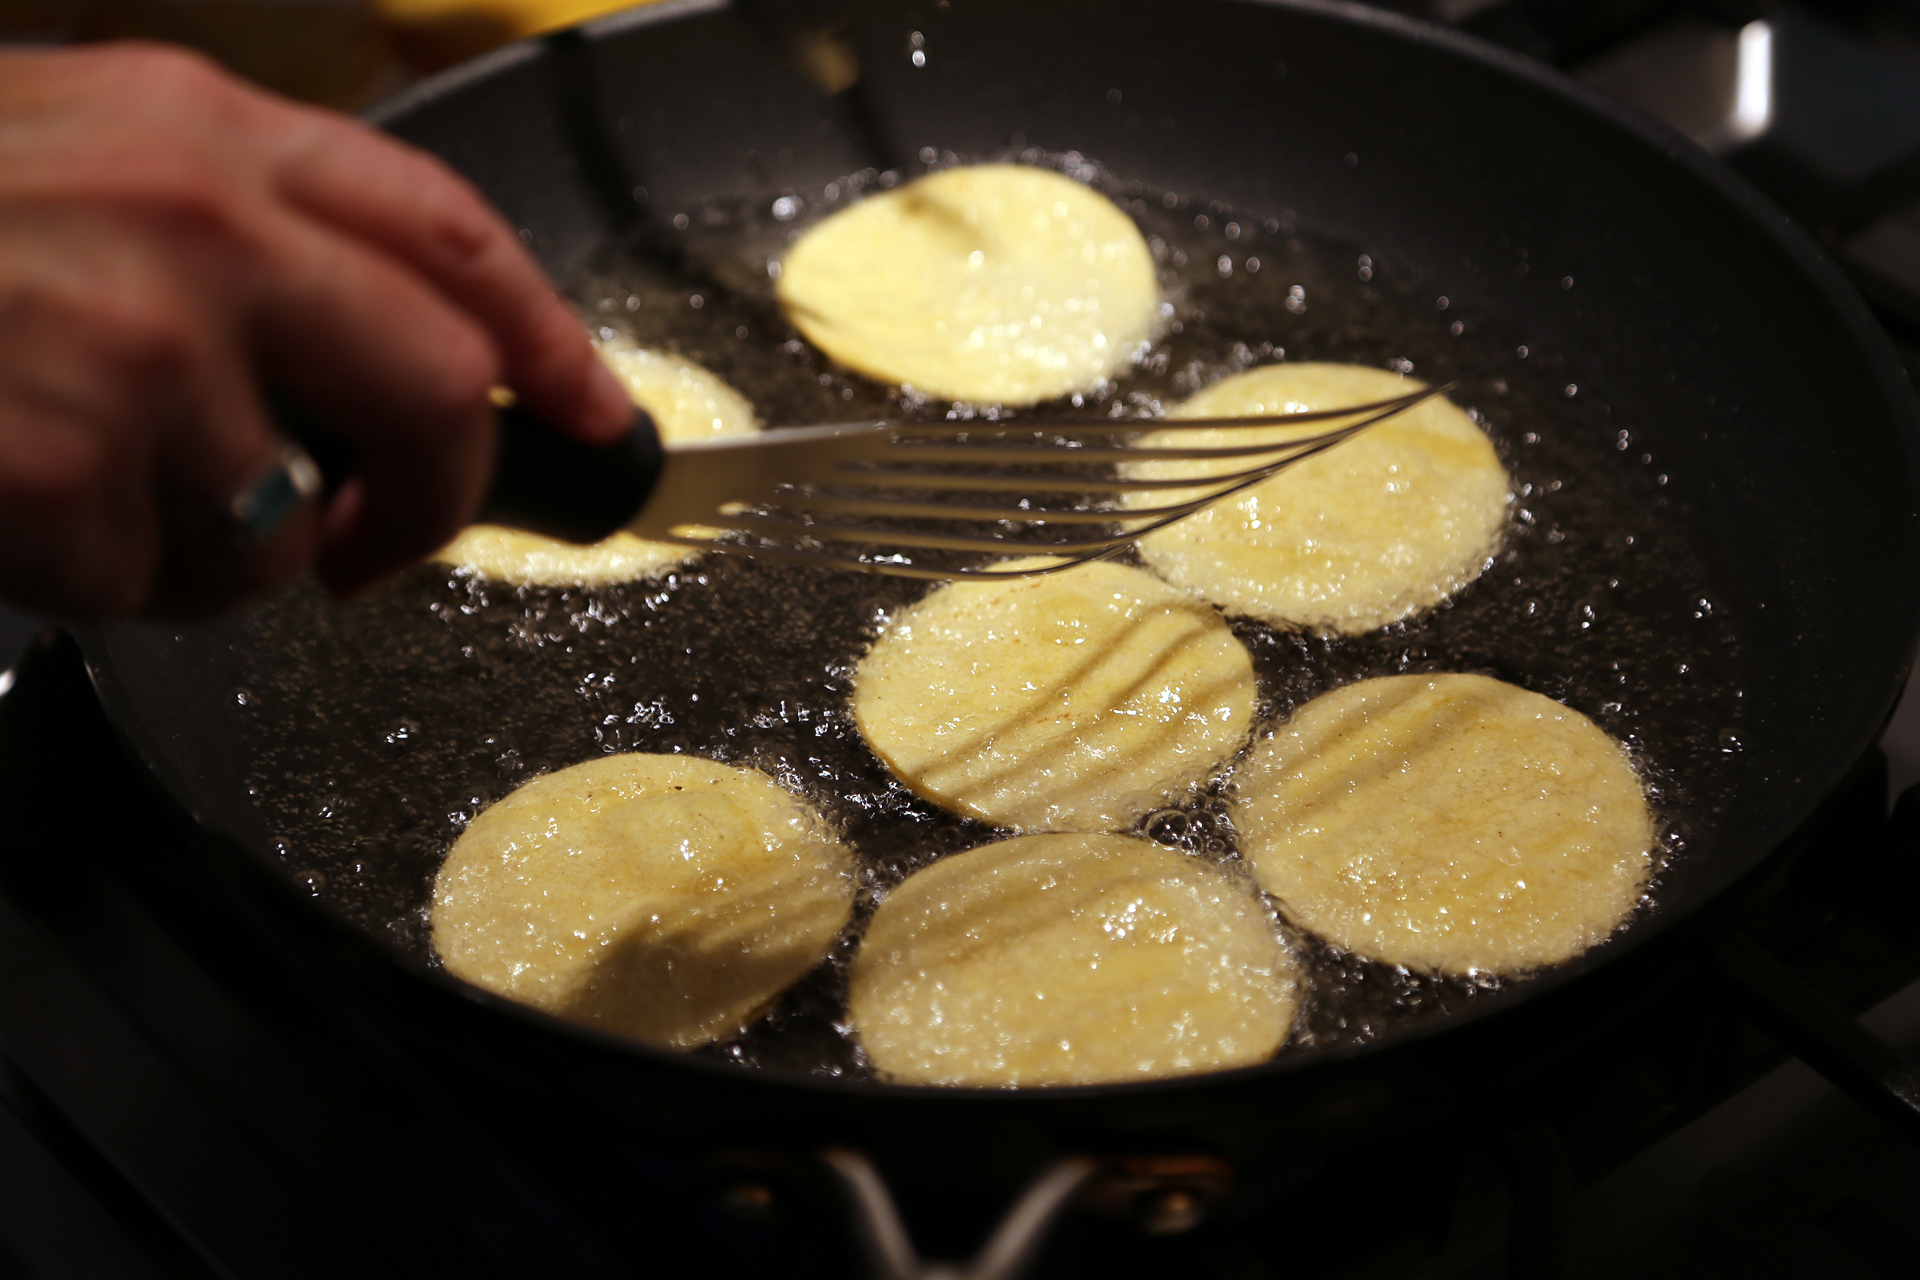 Warm about 1/2 inch of oil in a large frying pan over medium-high heat and then add the tortilla rounds.